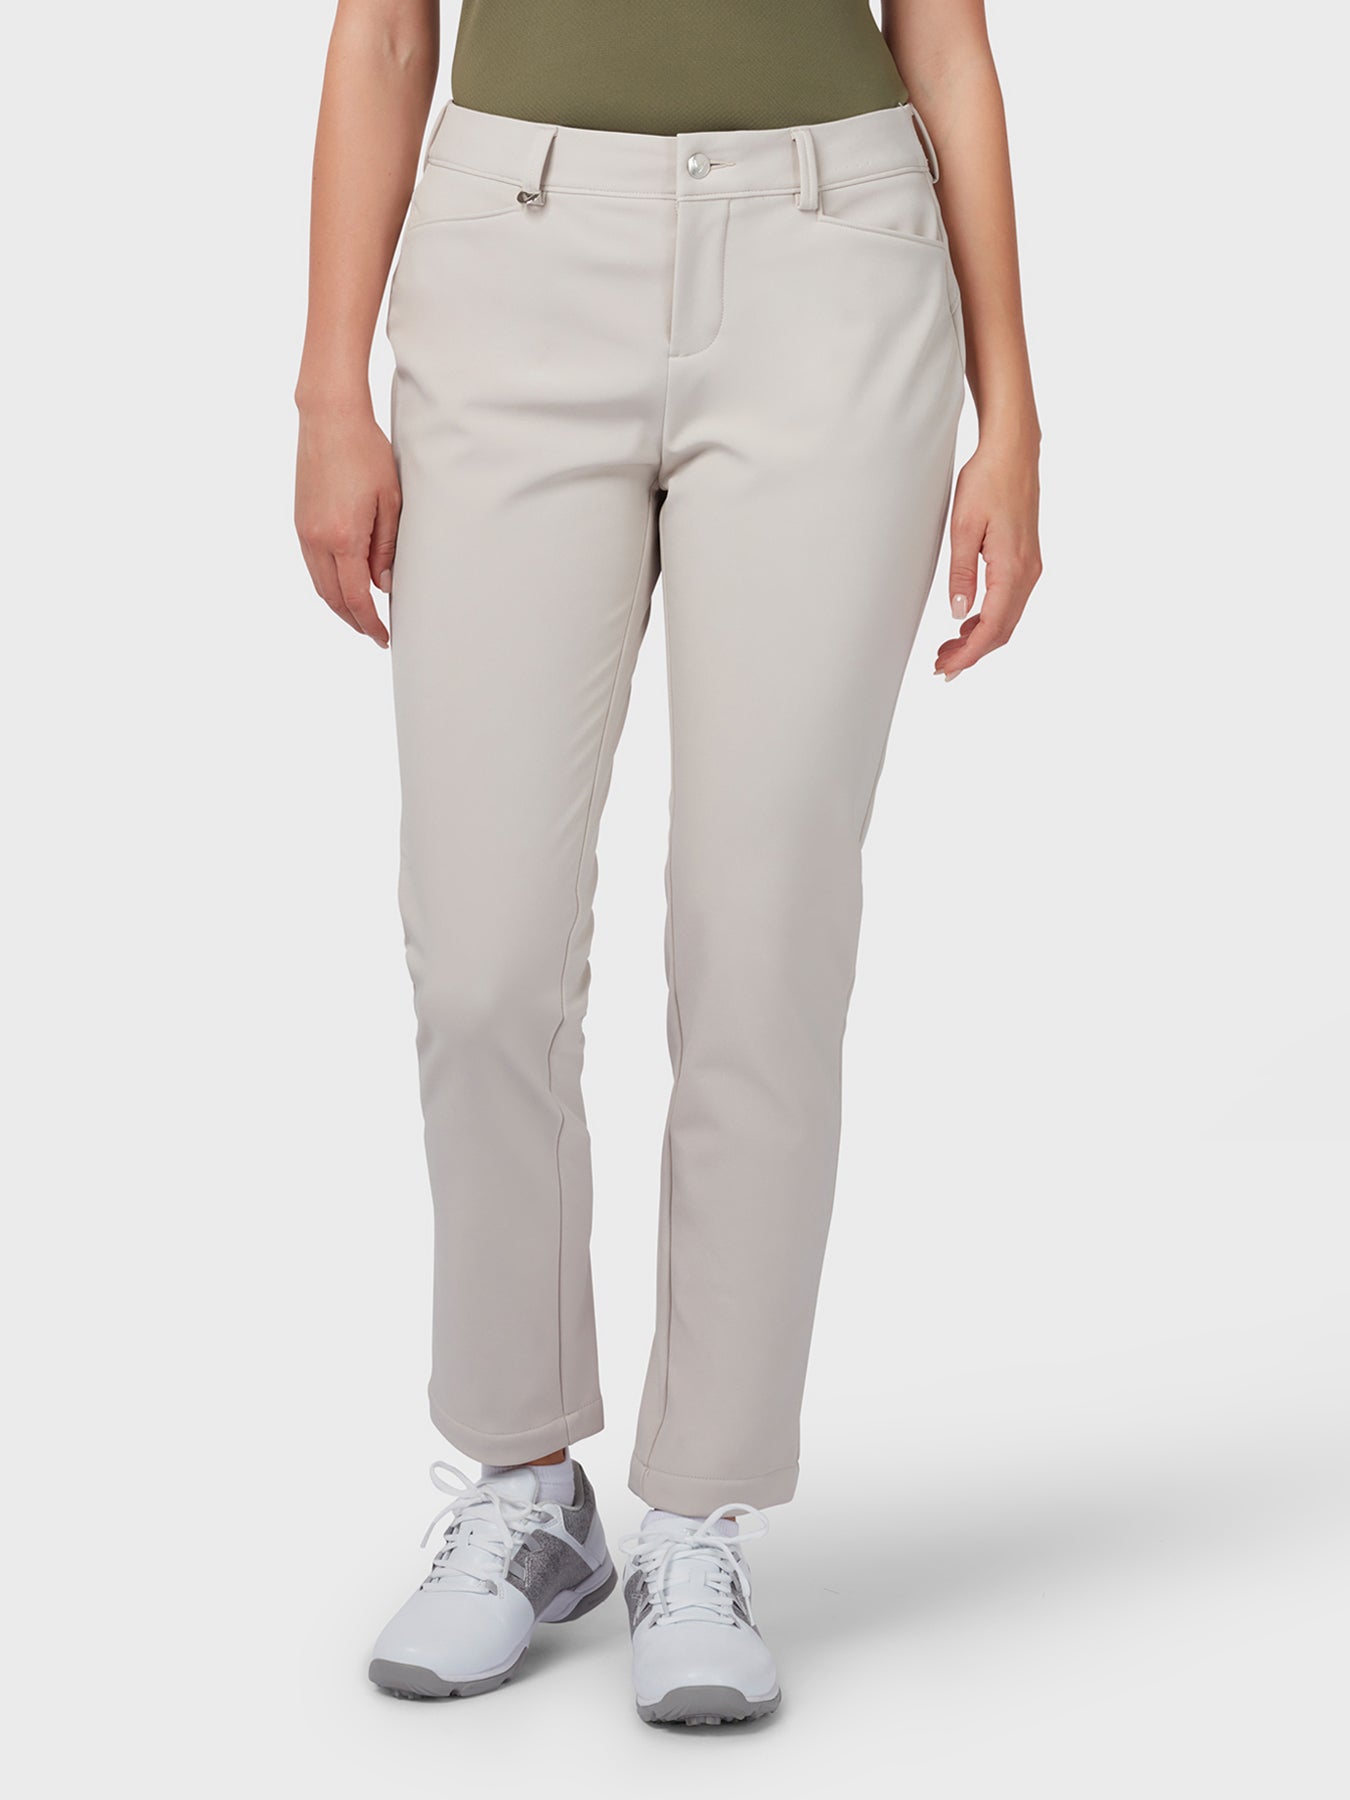 View Womens Thermal Trouser In Chateau Grey information